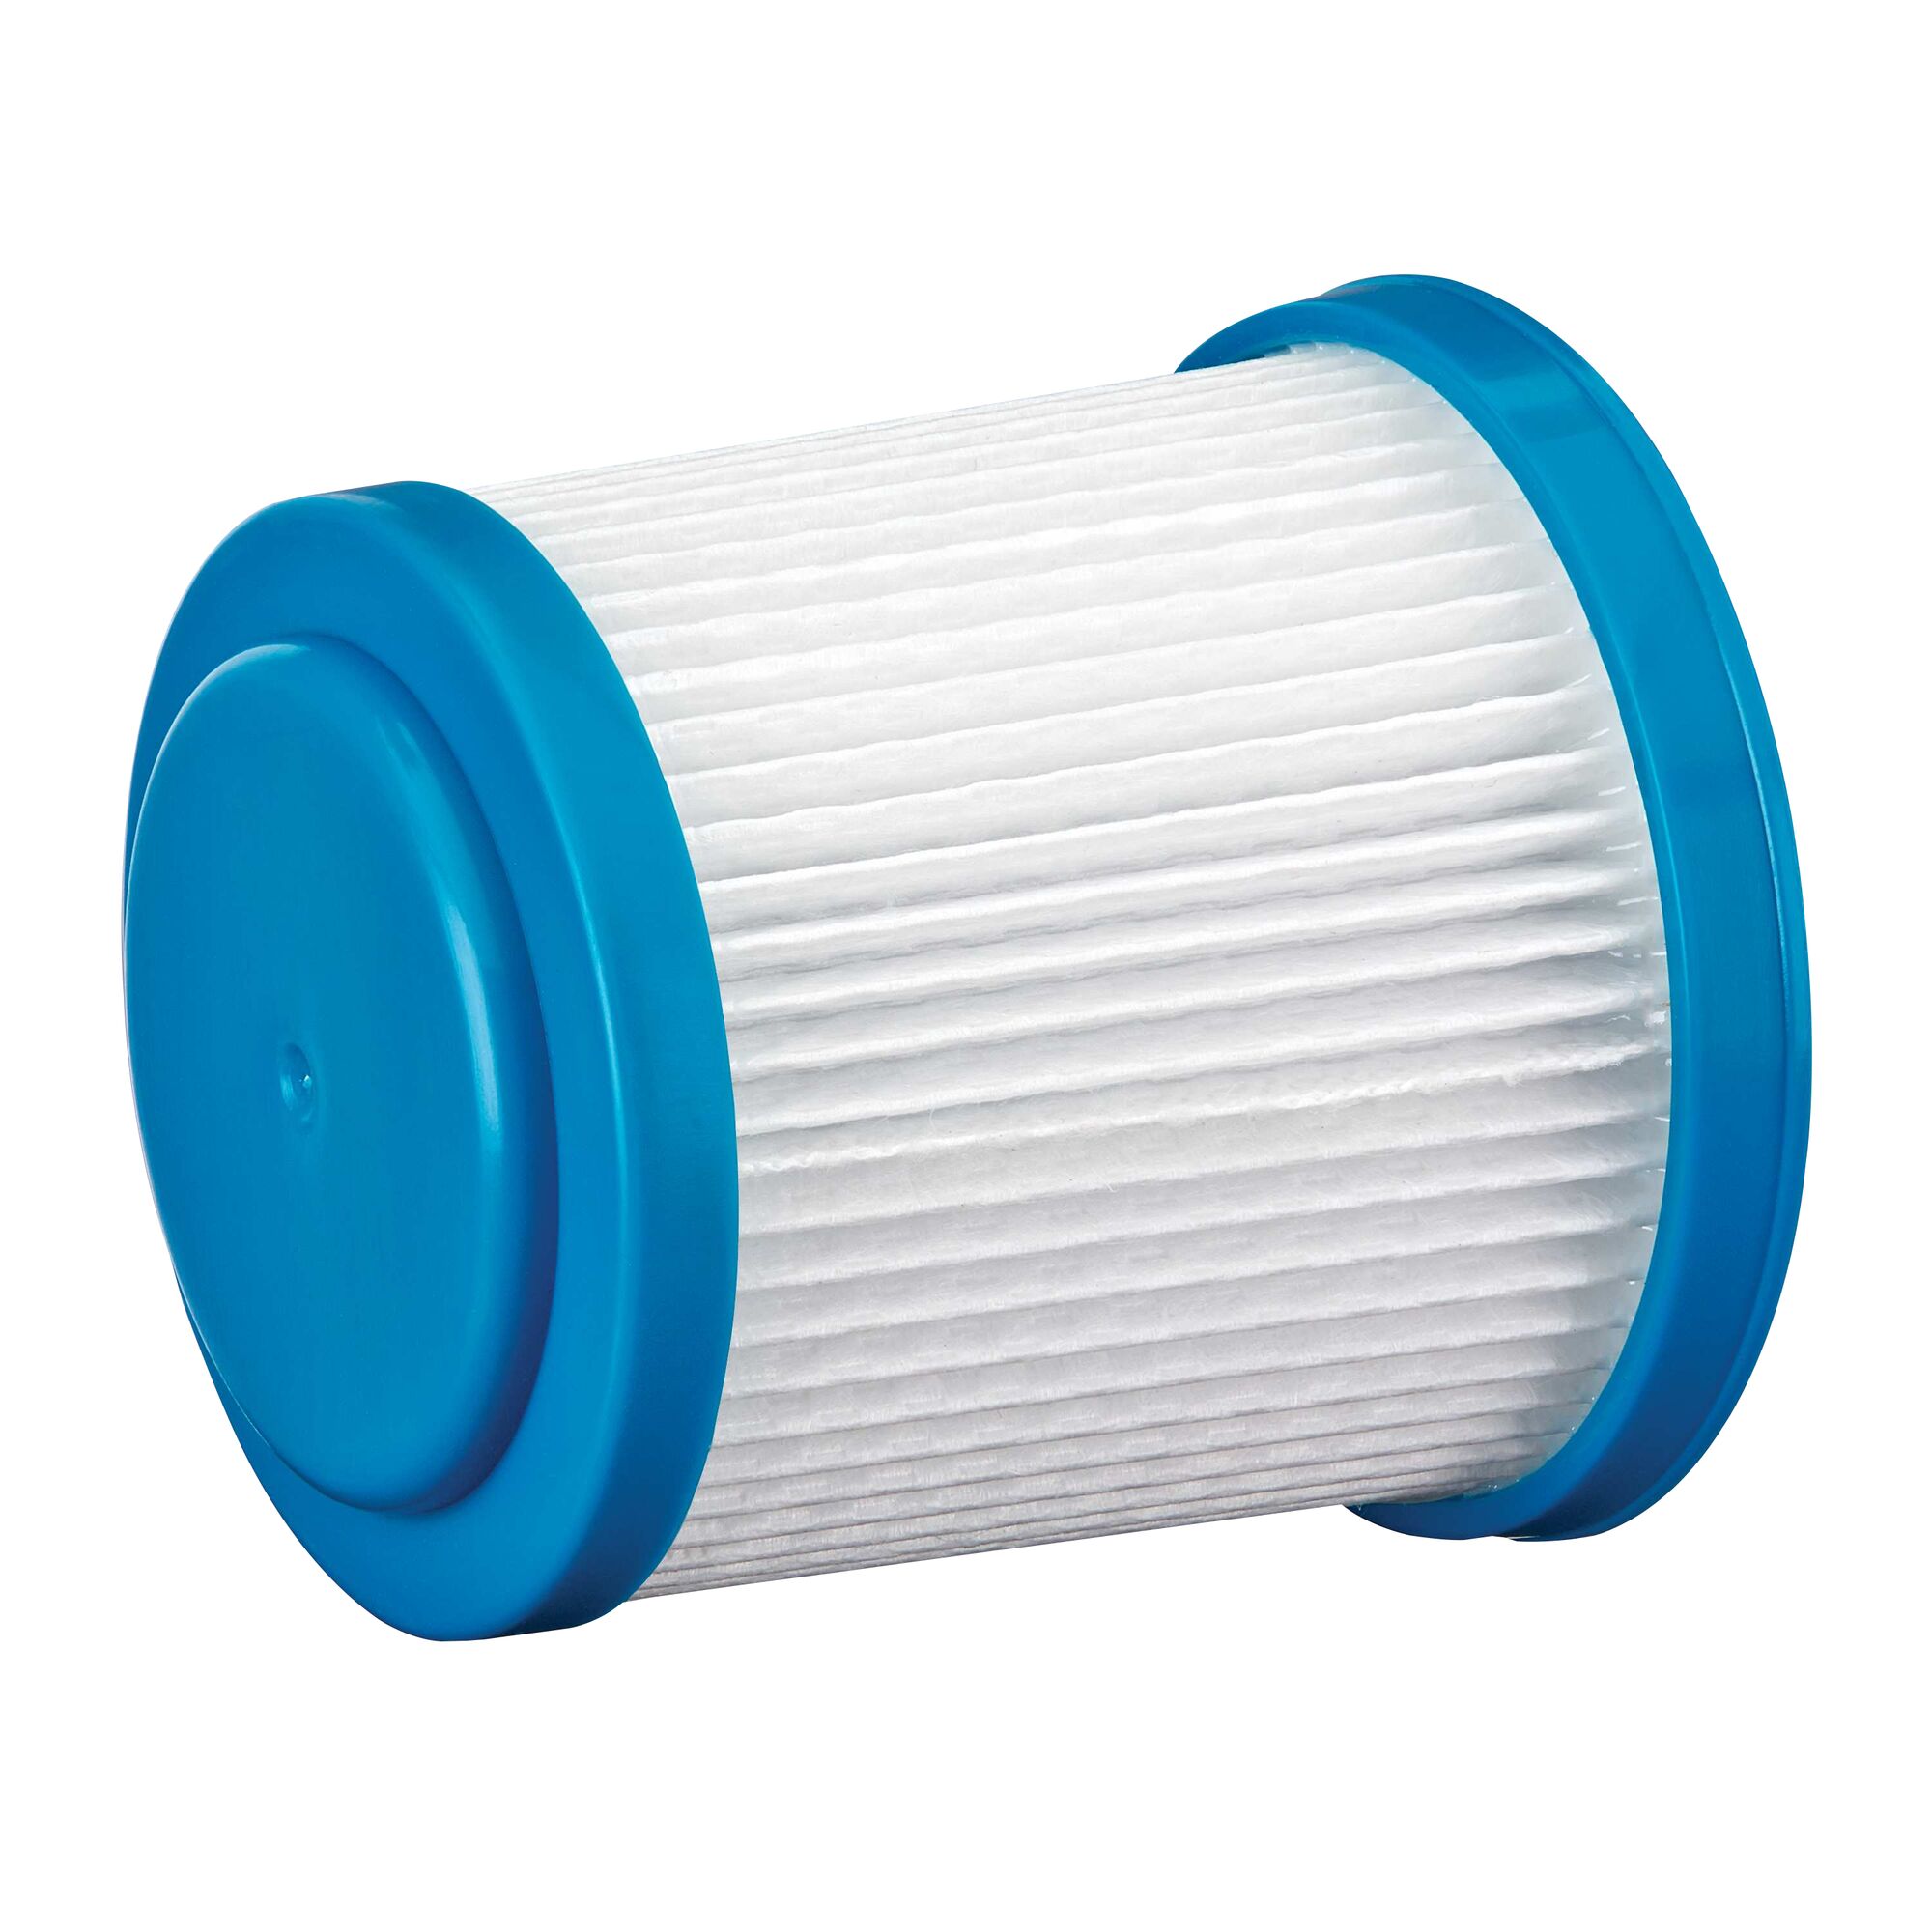 Replacement Pleated Filter for Smartech Stick Vacuum.